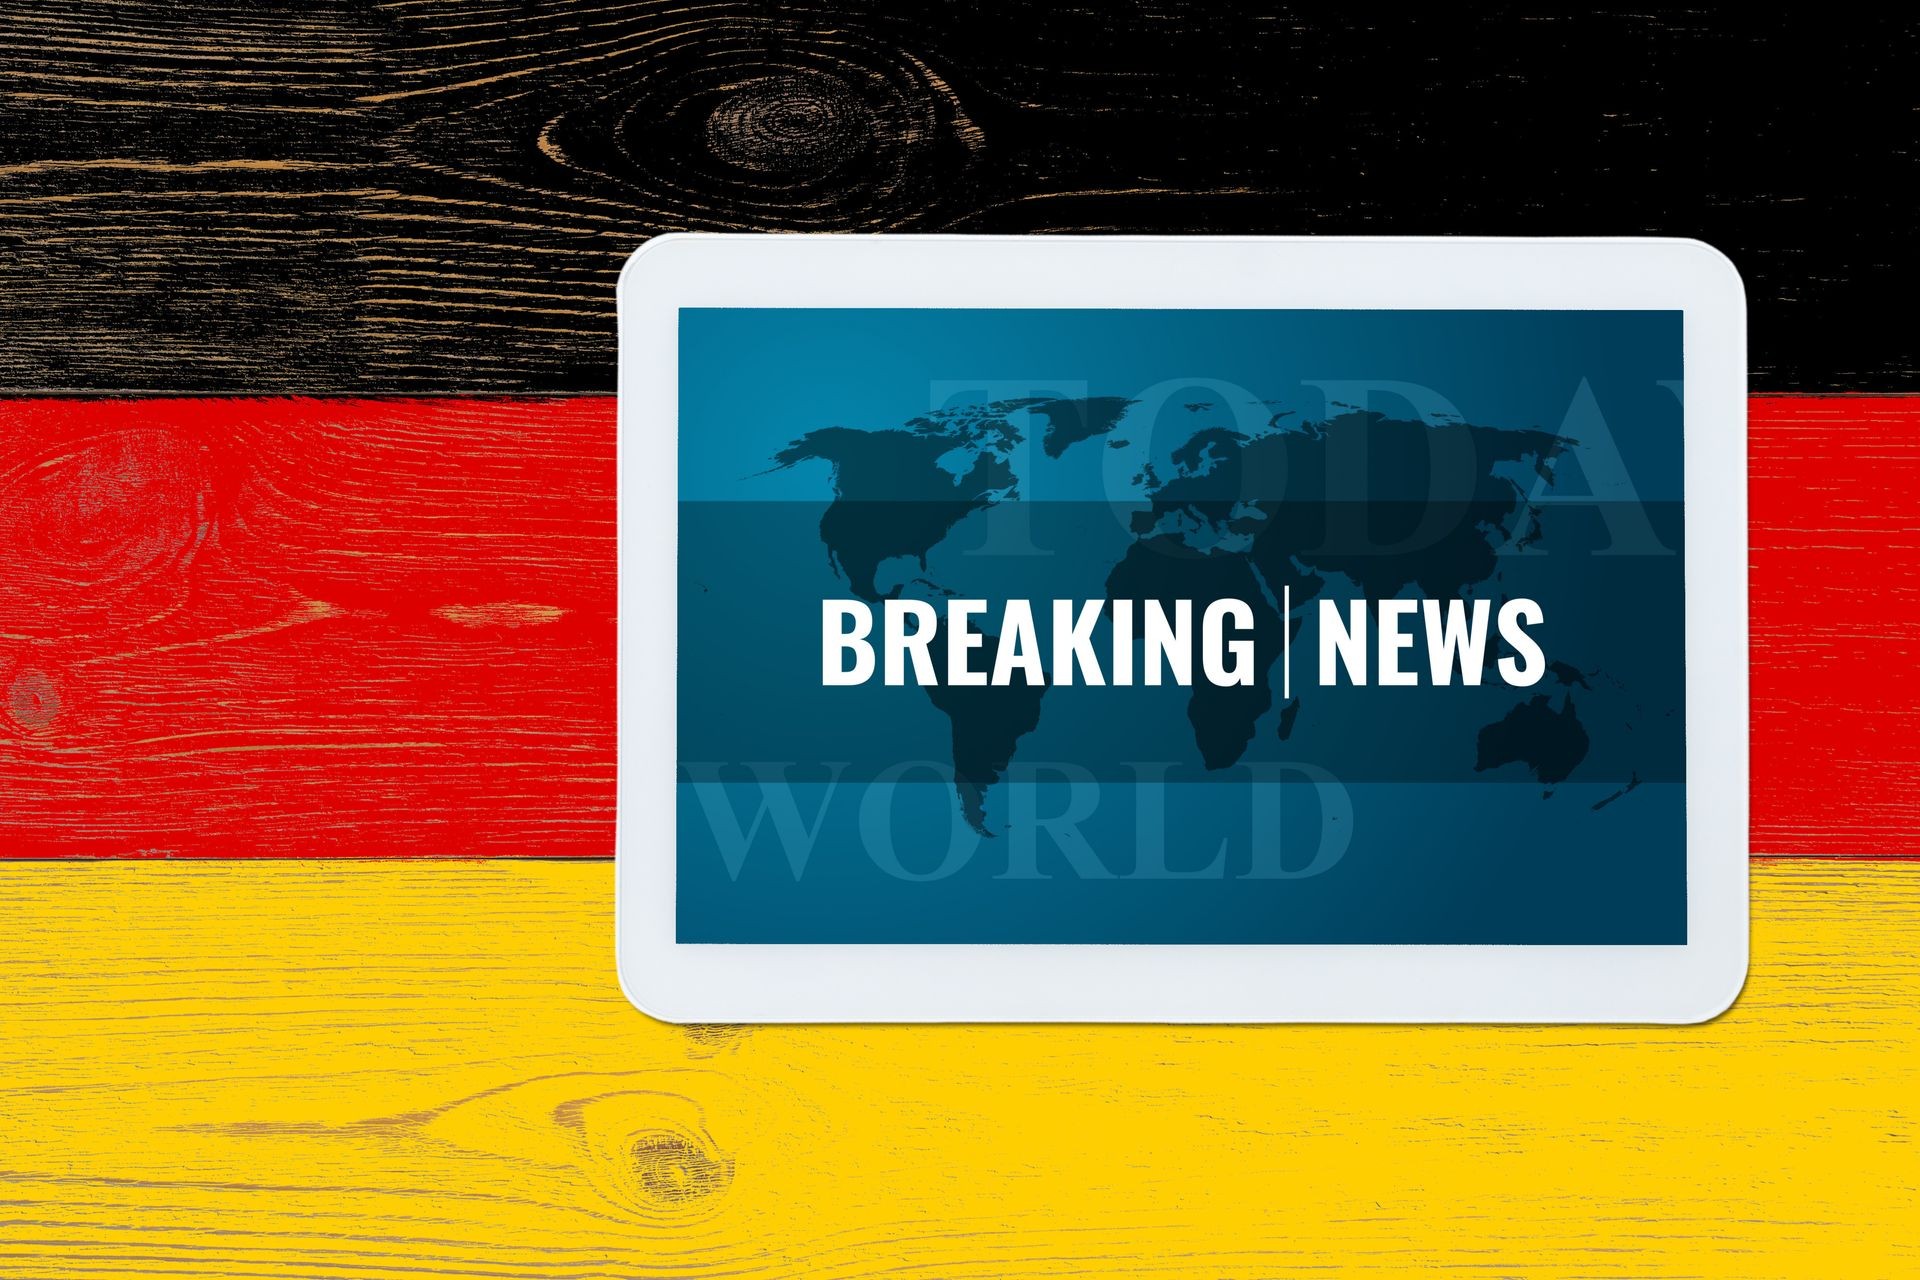 breaking news splash screen on tablet pc over painted germany flag